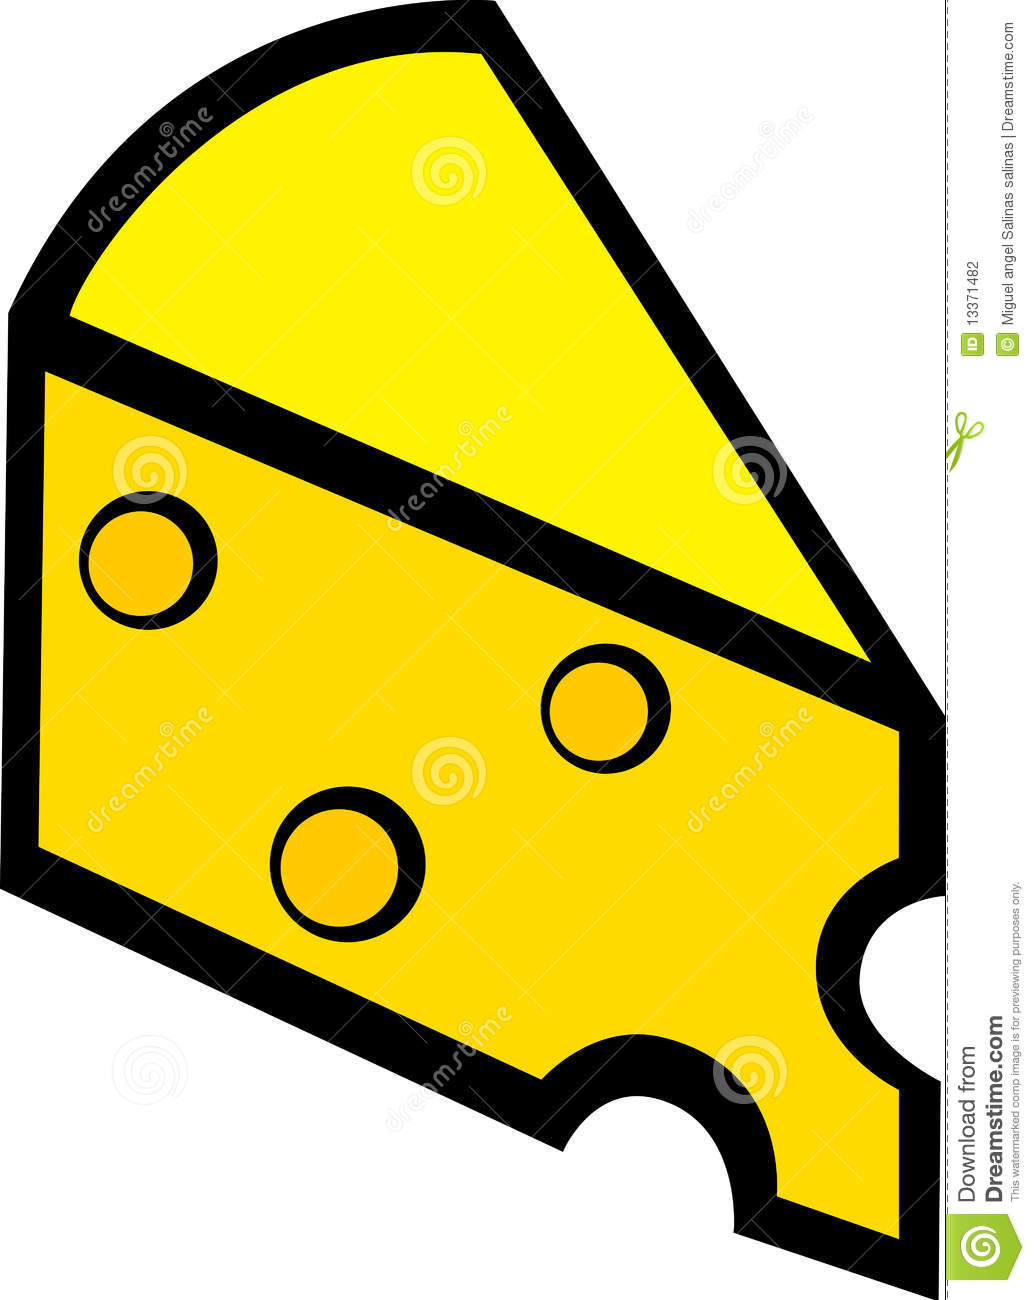 clipart of cheese